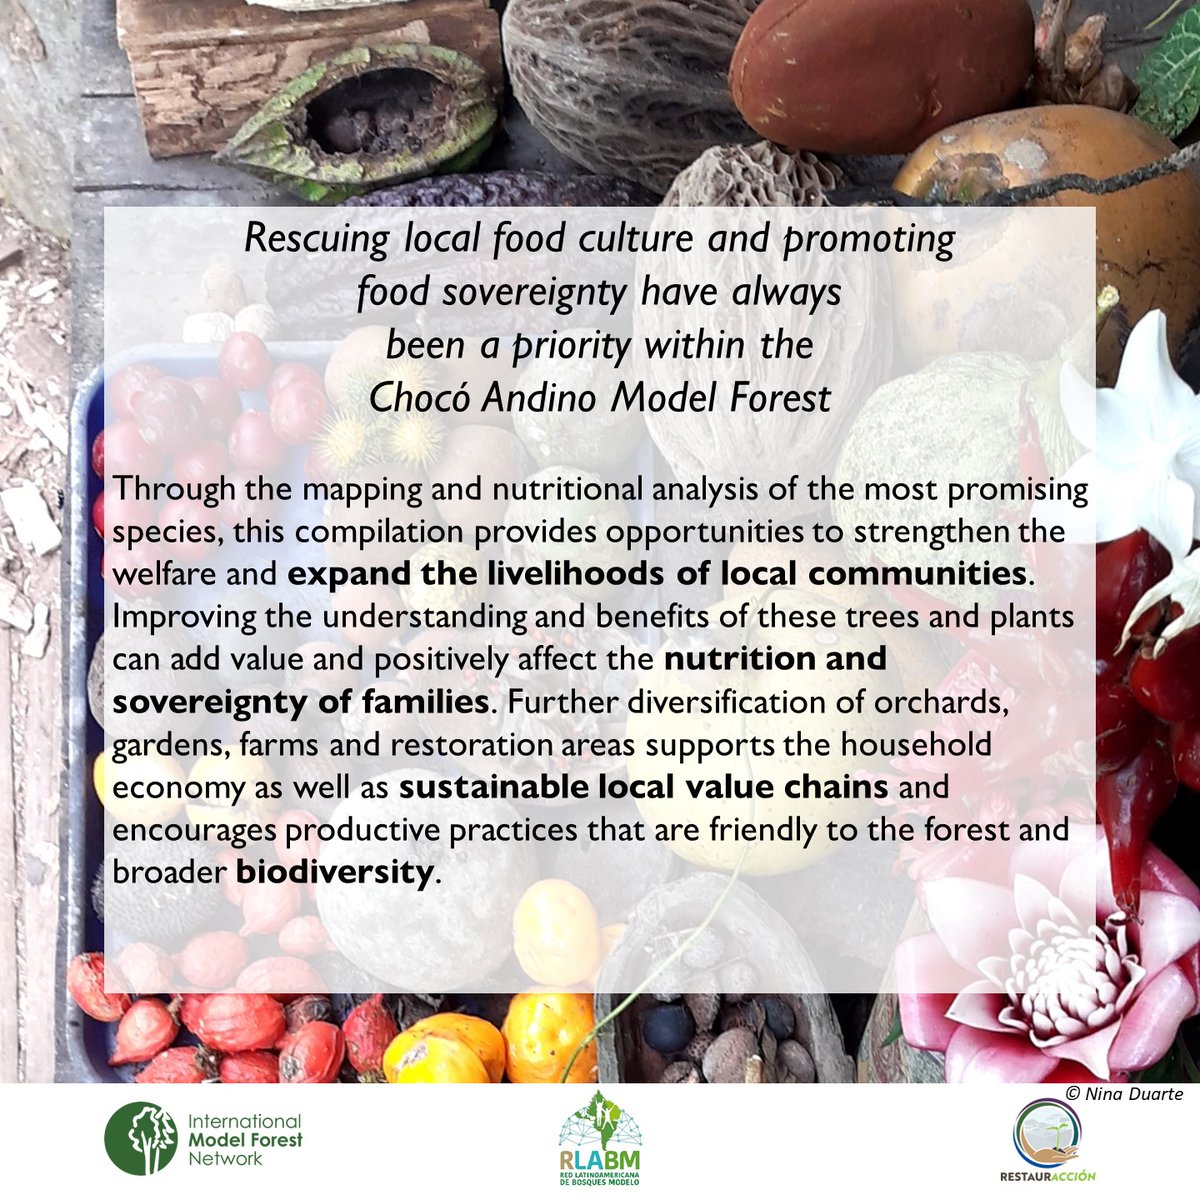 🌱 FAO highlights Chocó Andino Model Forest in a video 🎬 bit.ly/3tUP6TN #IamModelForest #GenerationRestoration @FAOForestry @GPFLRtweets @CIFOR @CATIEOficial @NRCan @IUCN @IUCN_forests